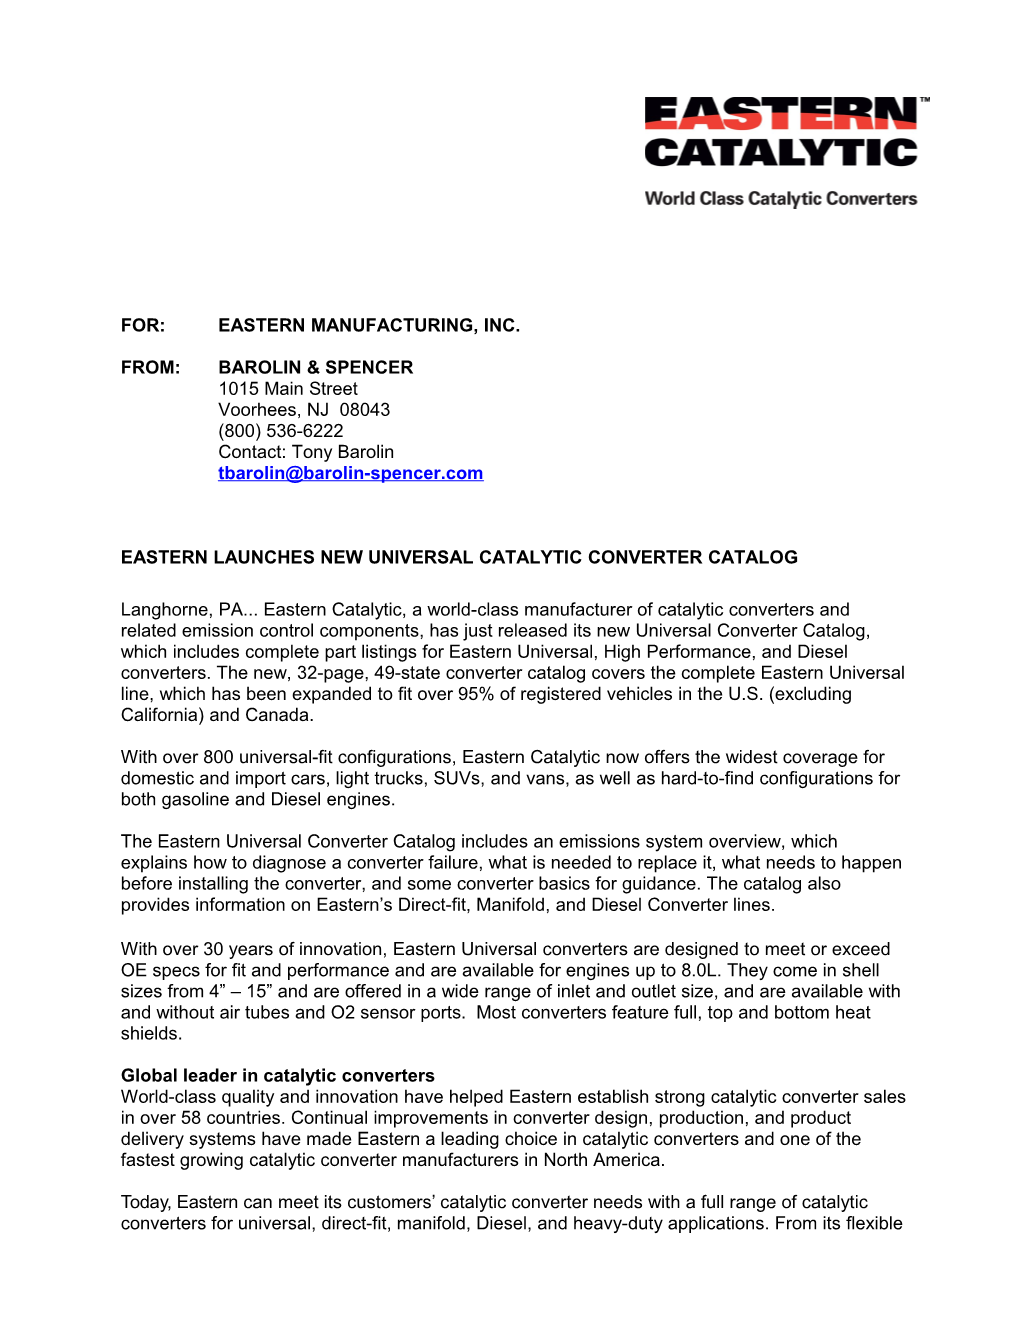 Eastern Launches New Universal Catalytic Converter Catalog